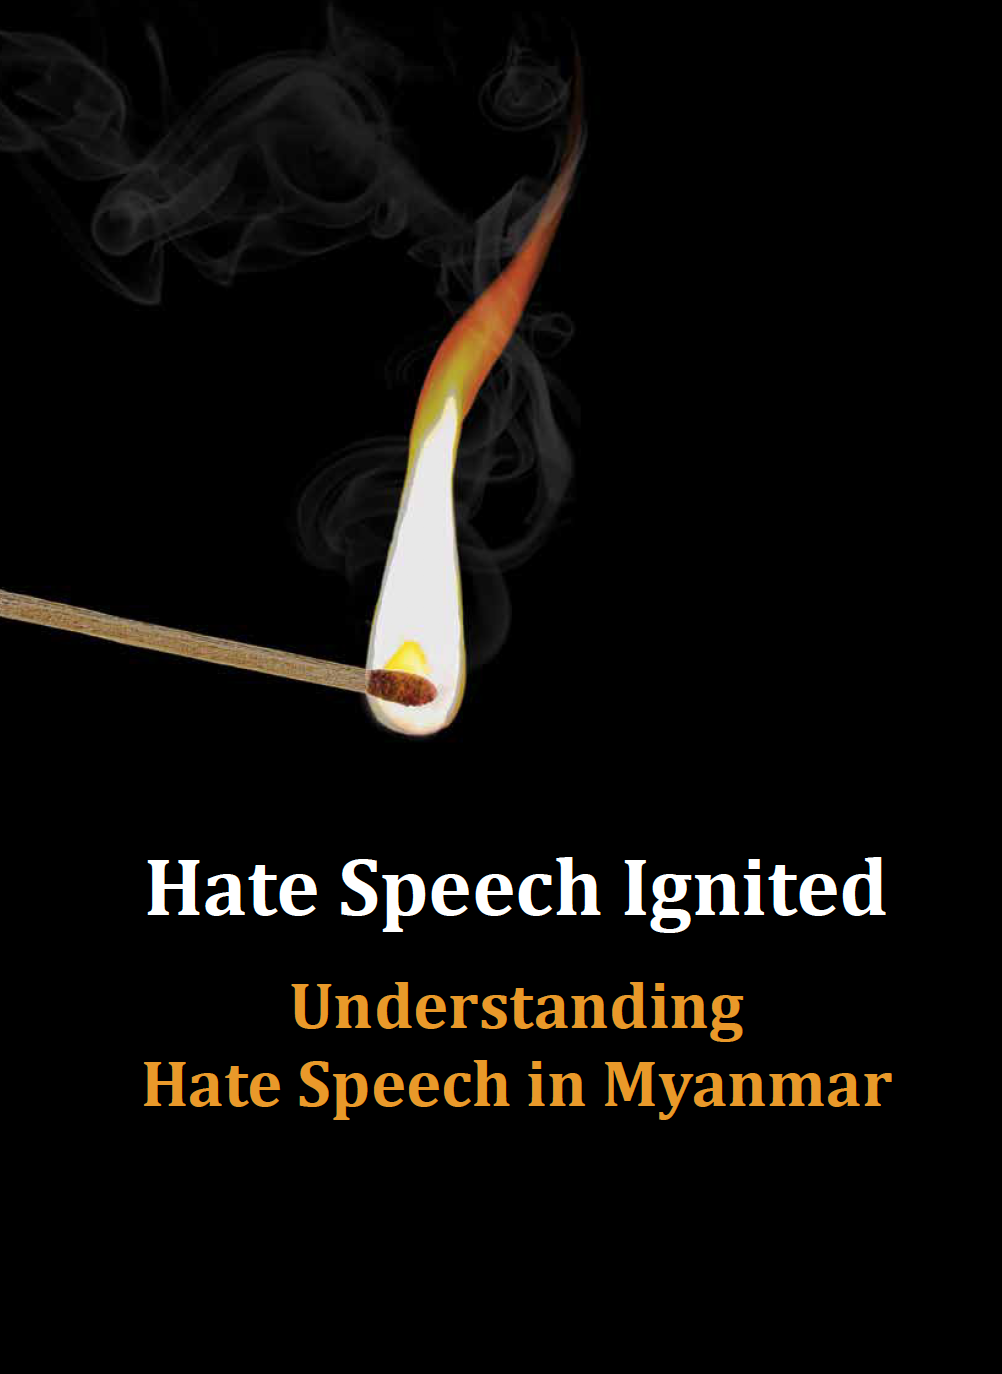 Hate Speech Ignited book cover